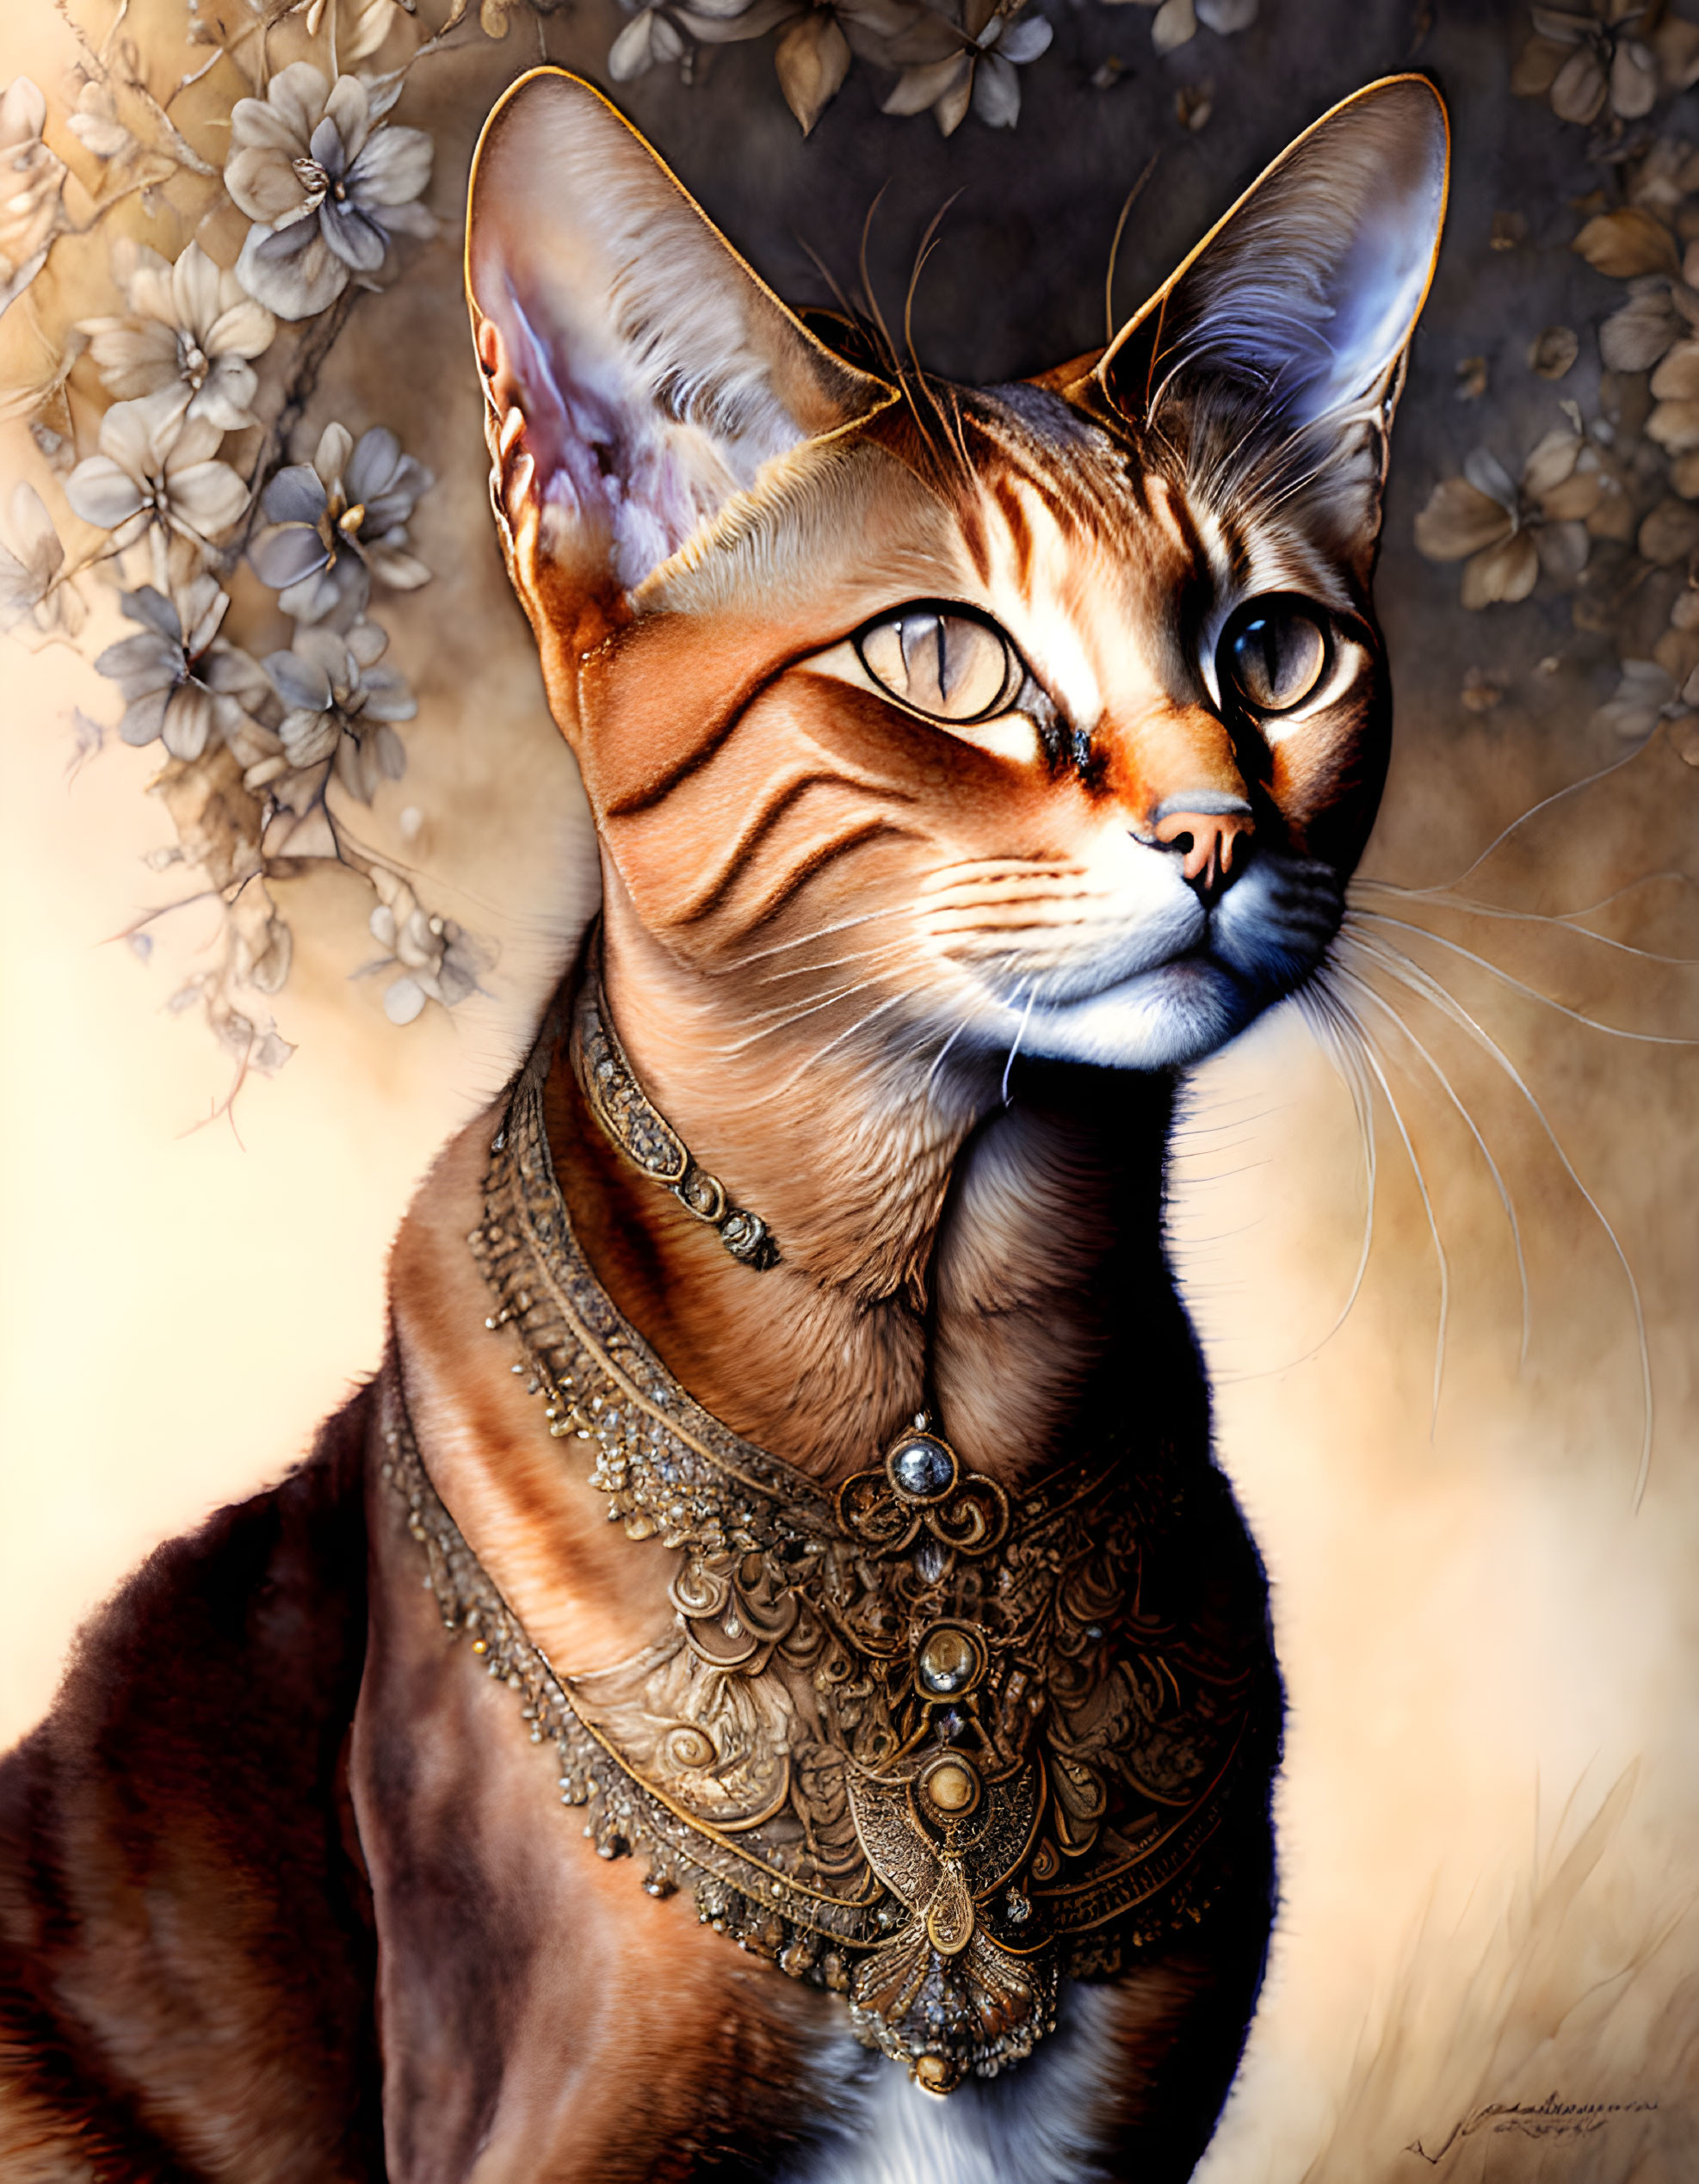 Majestic cat with golden eyes and intricate jewelry in soft brown tones